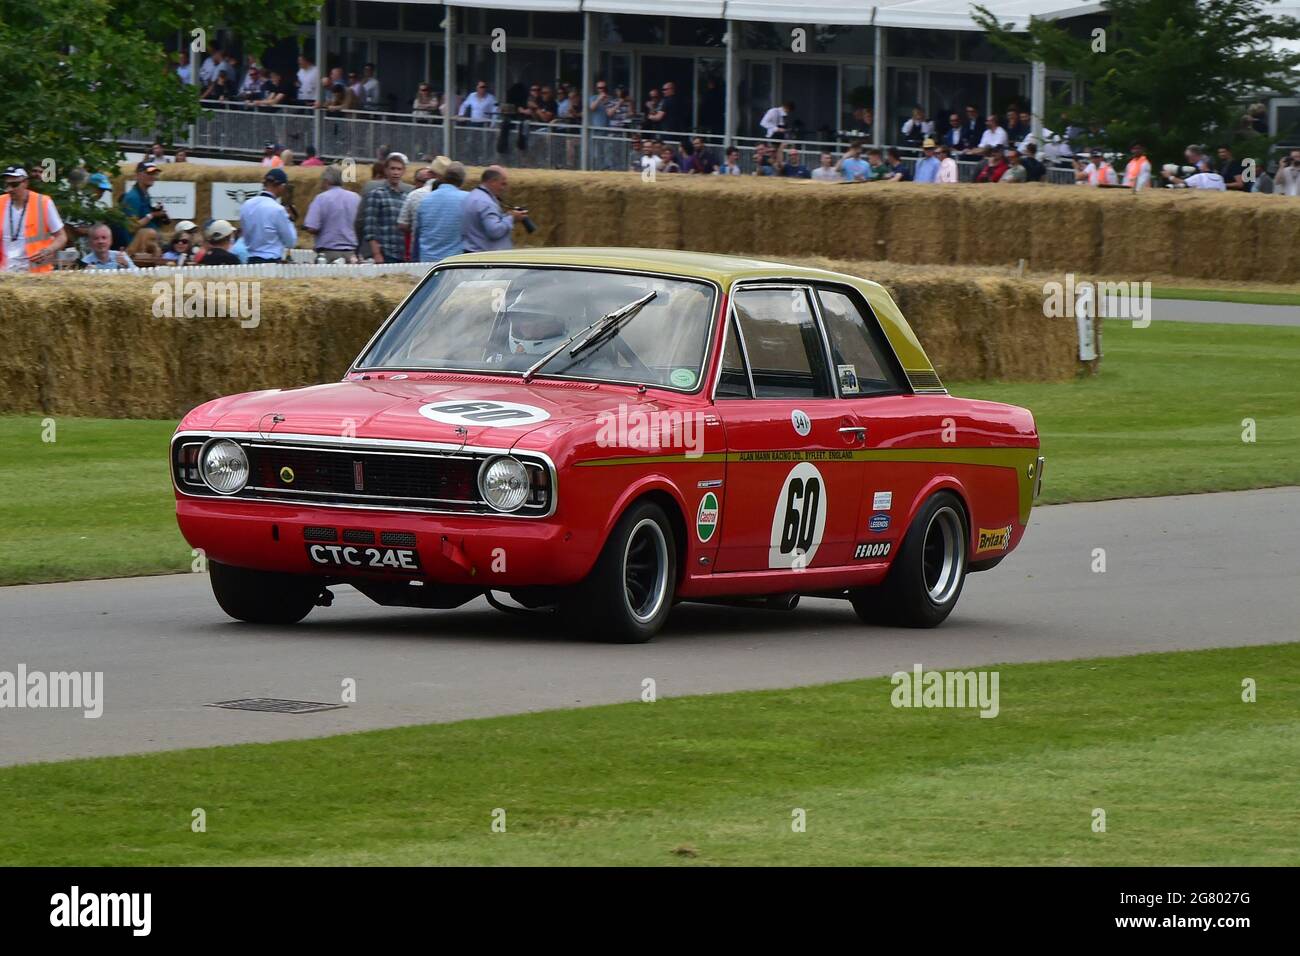 Jon Miles, Ford Lotus Cortina Mk2, Great All-Rounders - Jacky Ickx, The Maestros - Motorsport's Great All-Rounders, Goodwood Festival of Speed, Goodwo Foto Stock